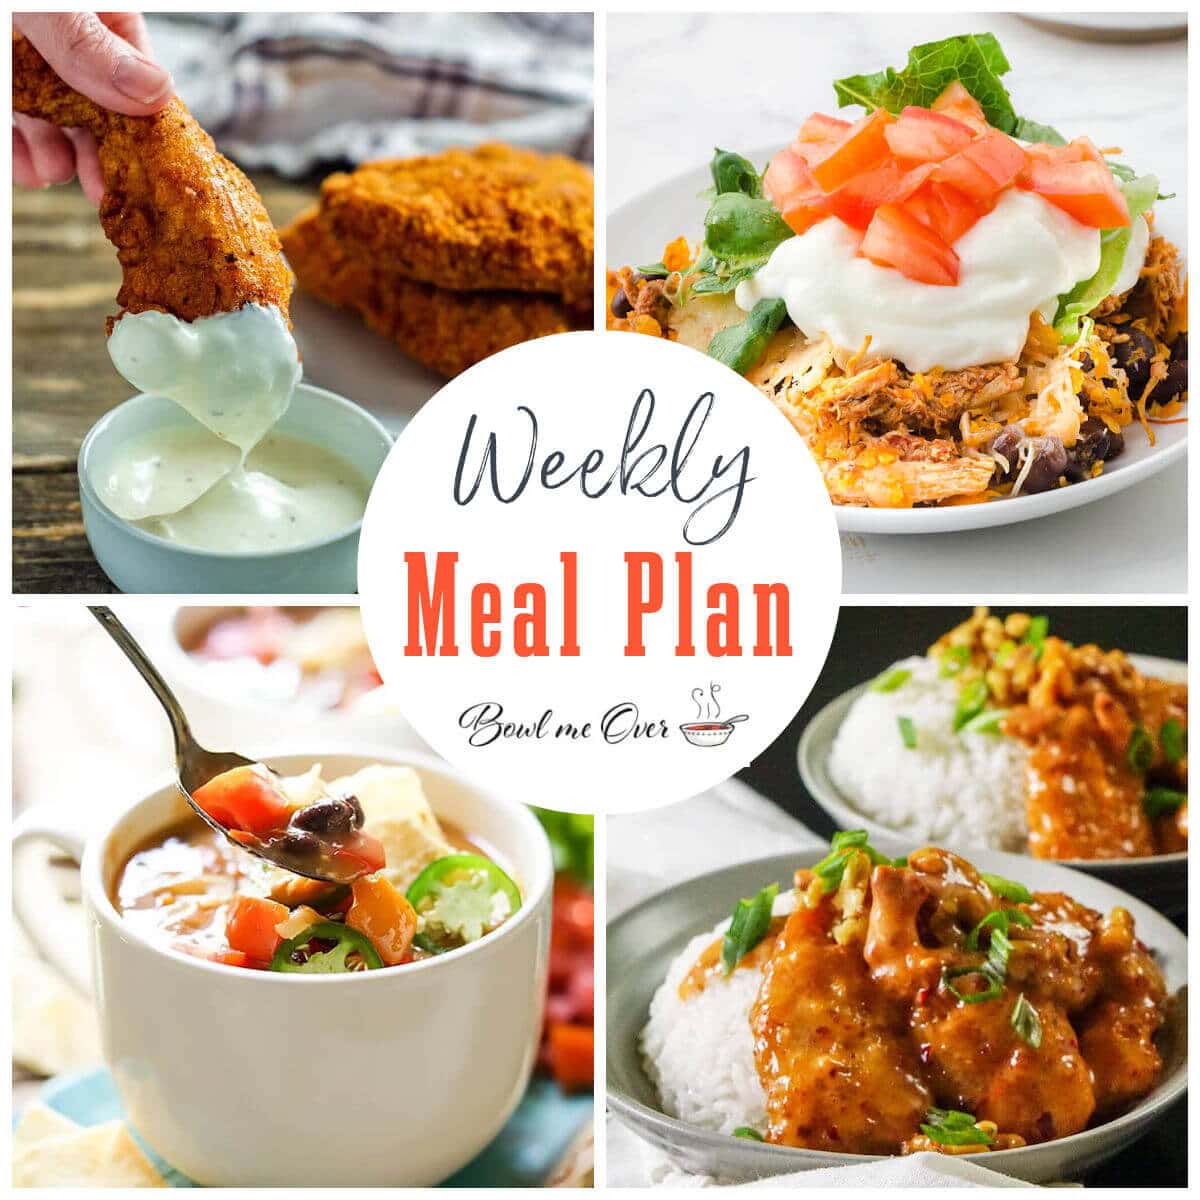 Photos of food for weekly meal plan 7, with print overlay.